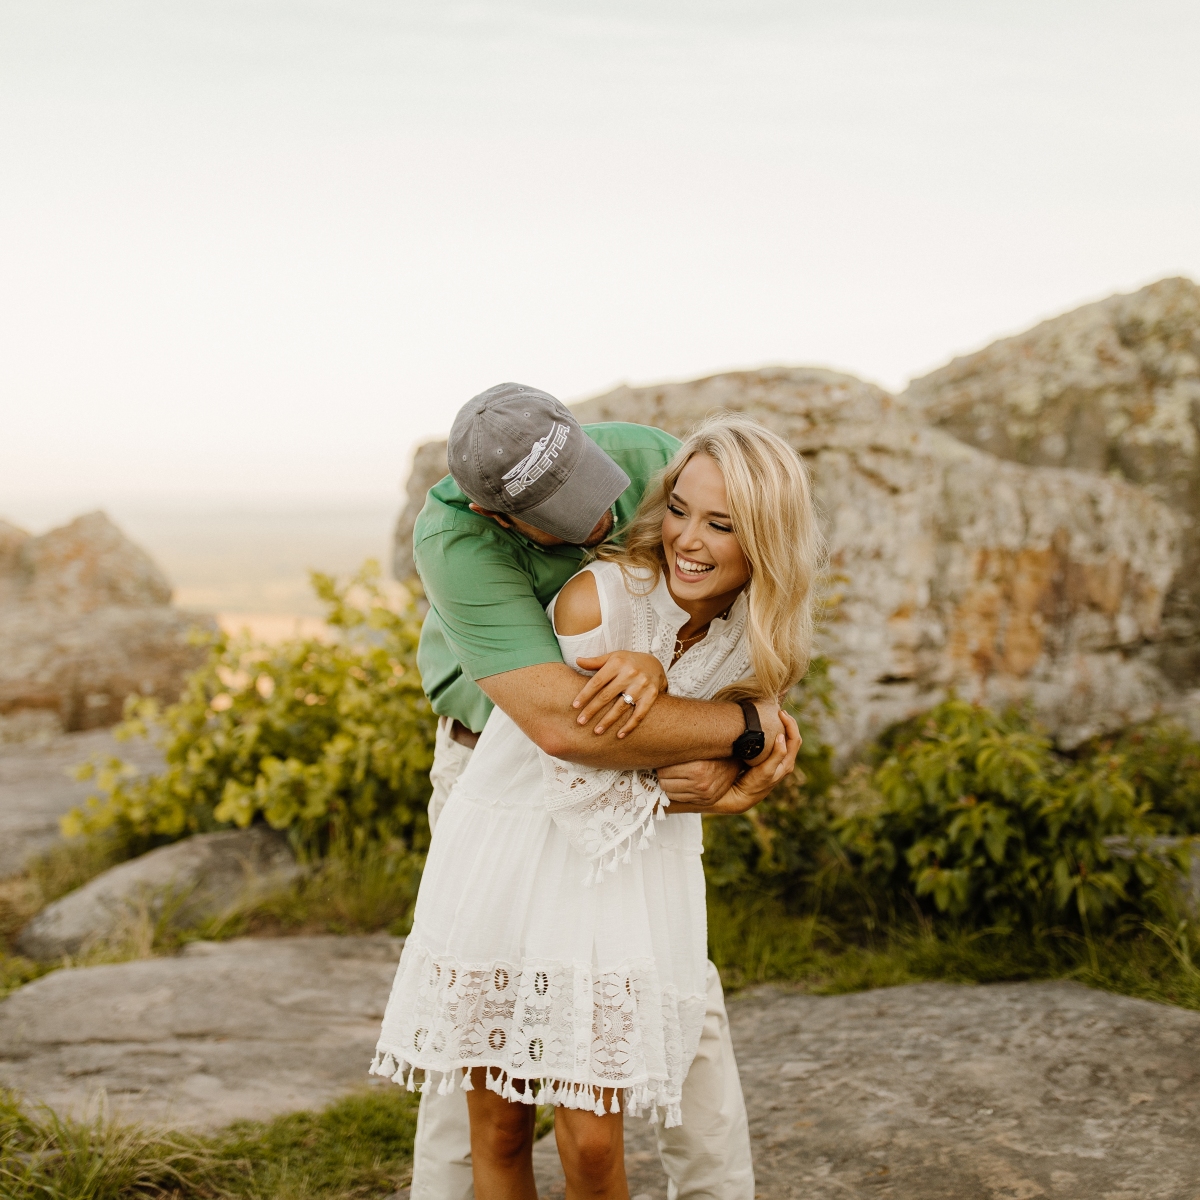 How to make the most of your engagement session